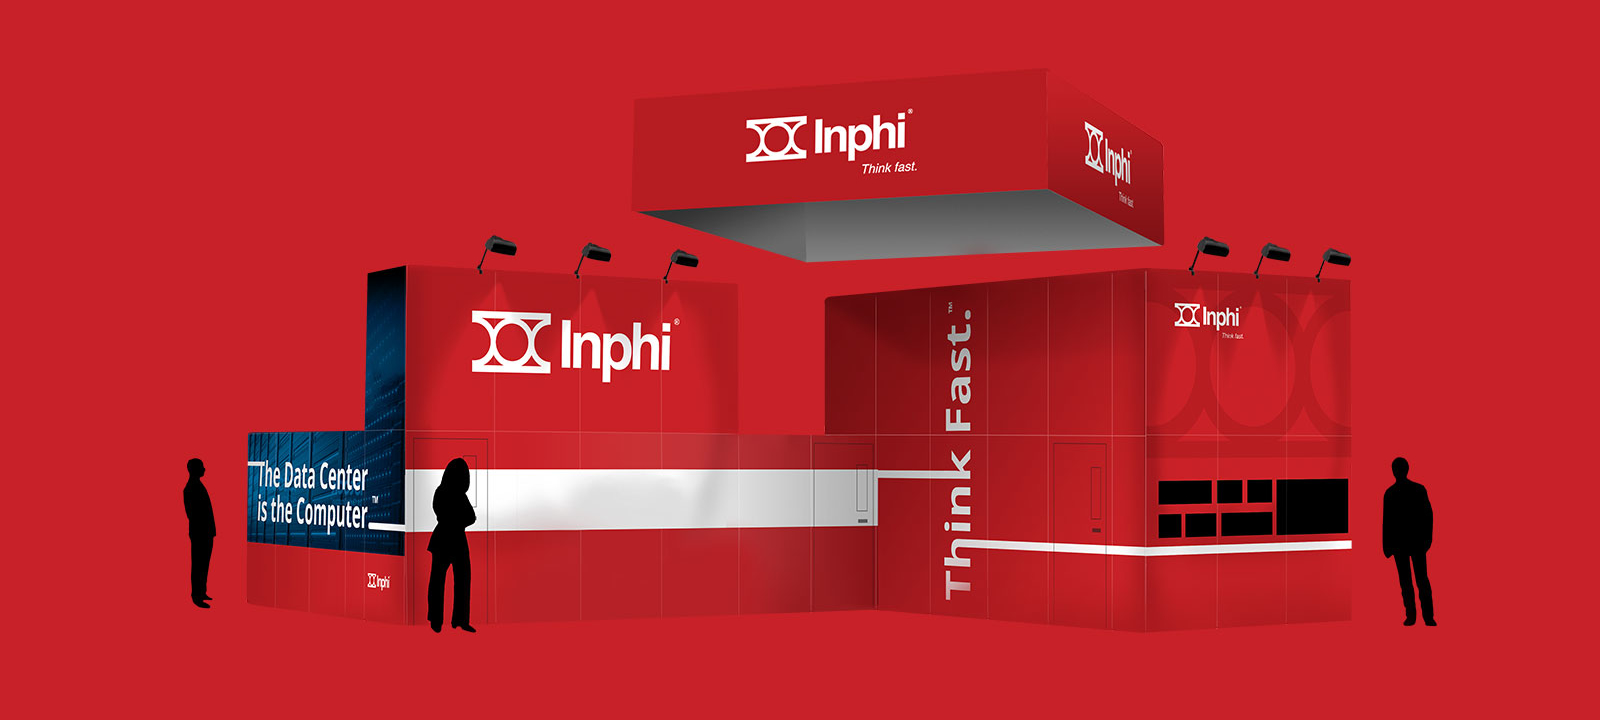 Inphi trade show booth design